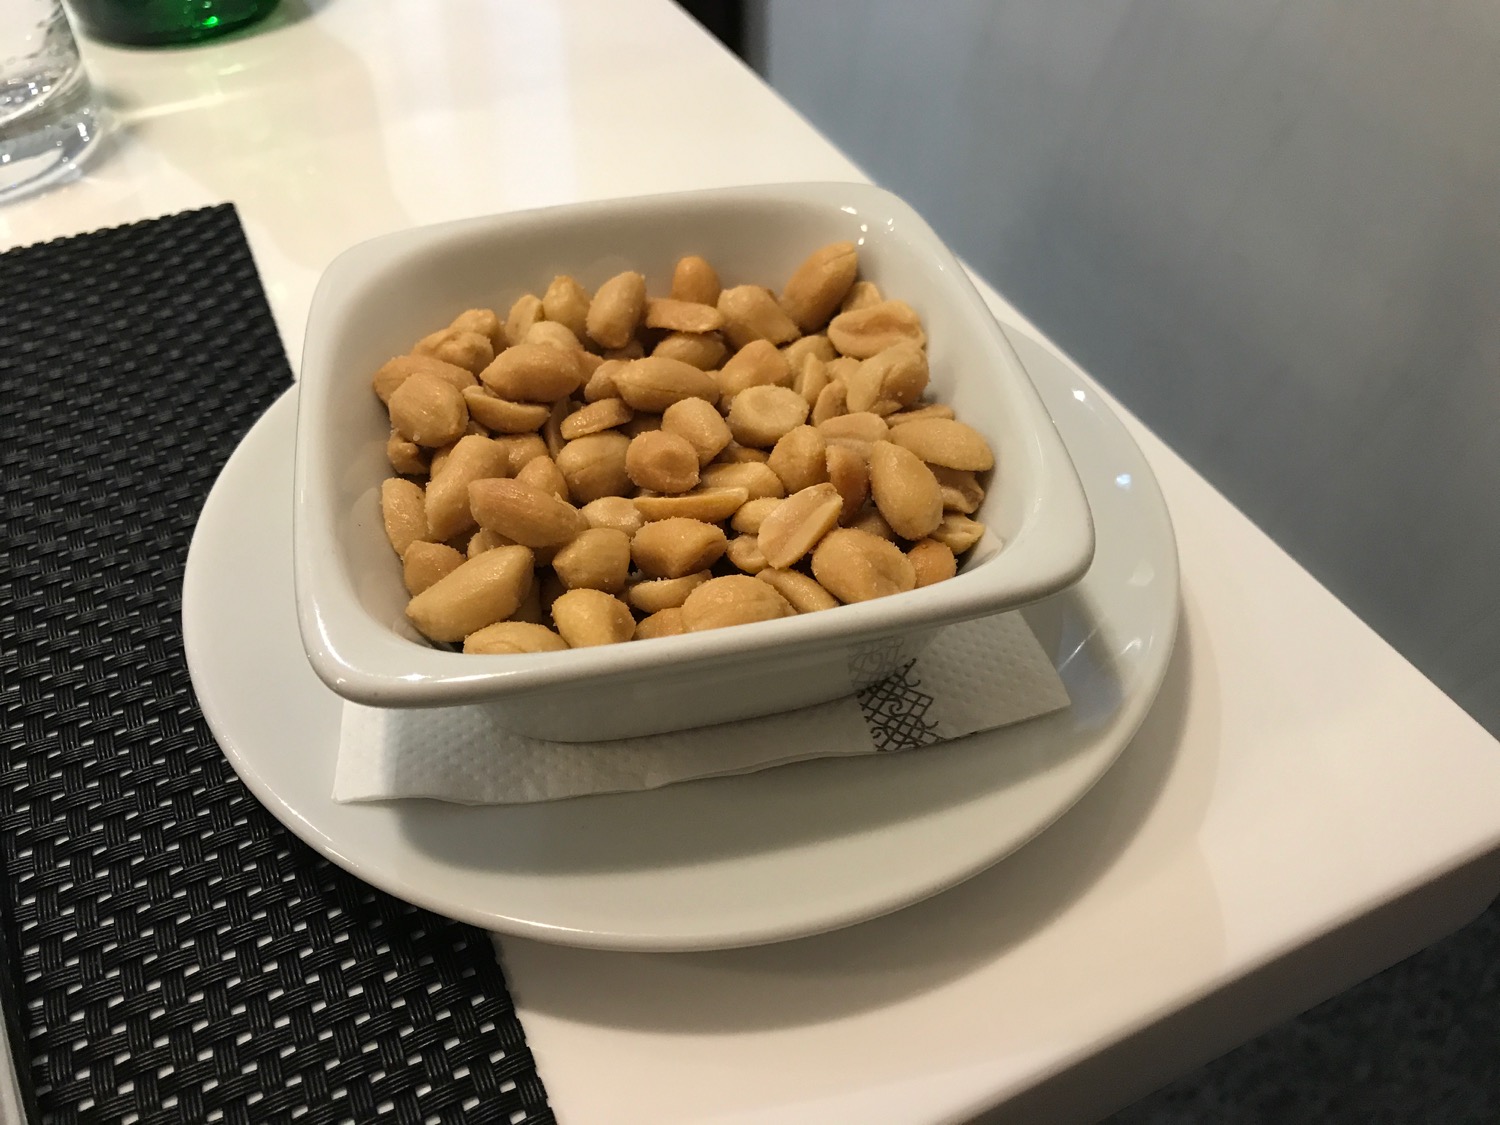 a bowl of peanuts on a plate